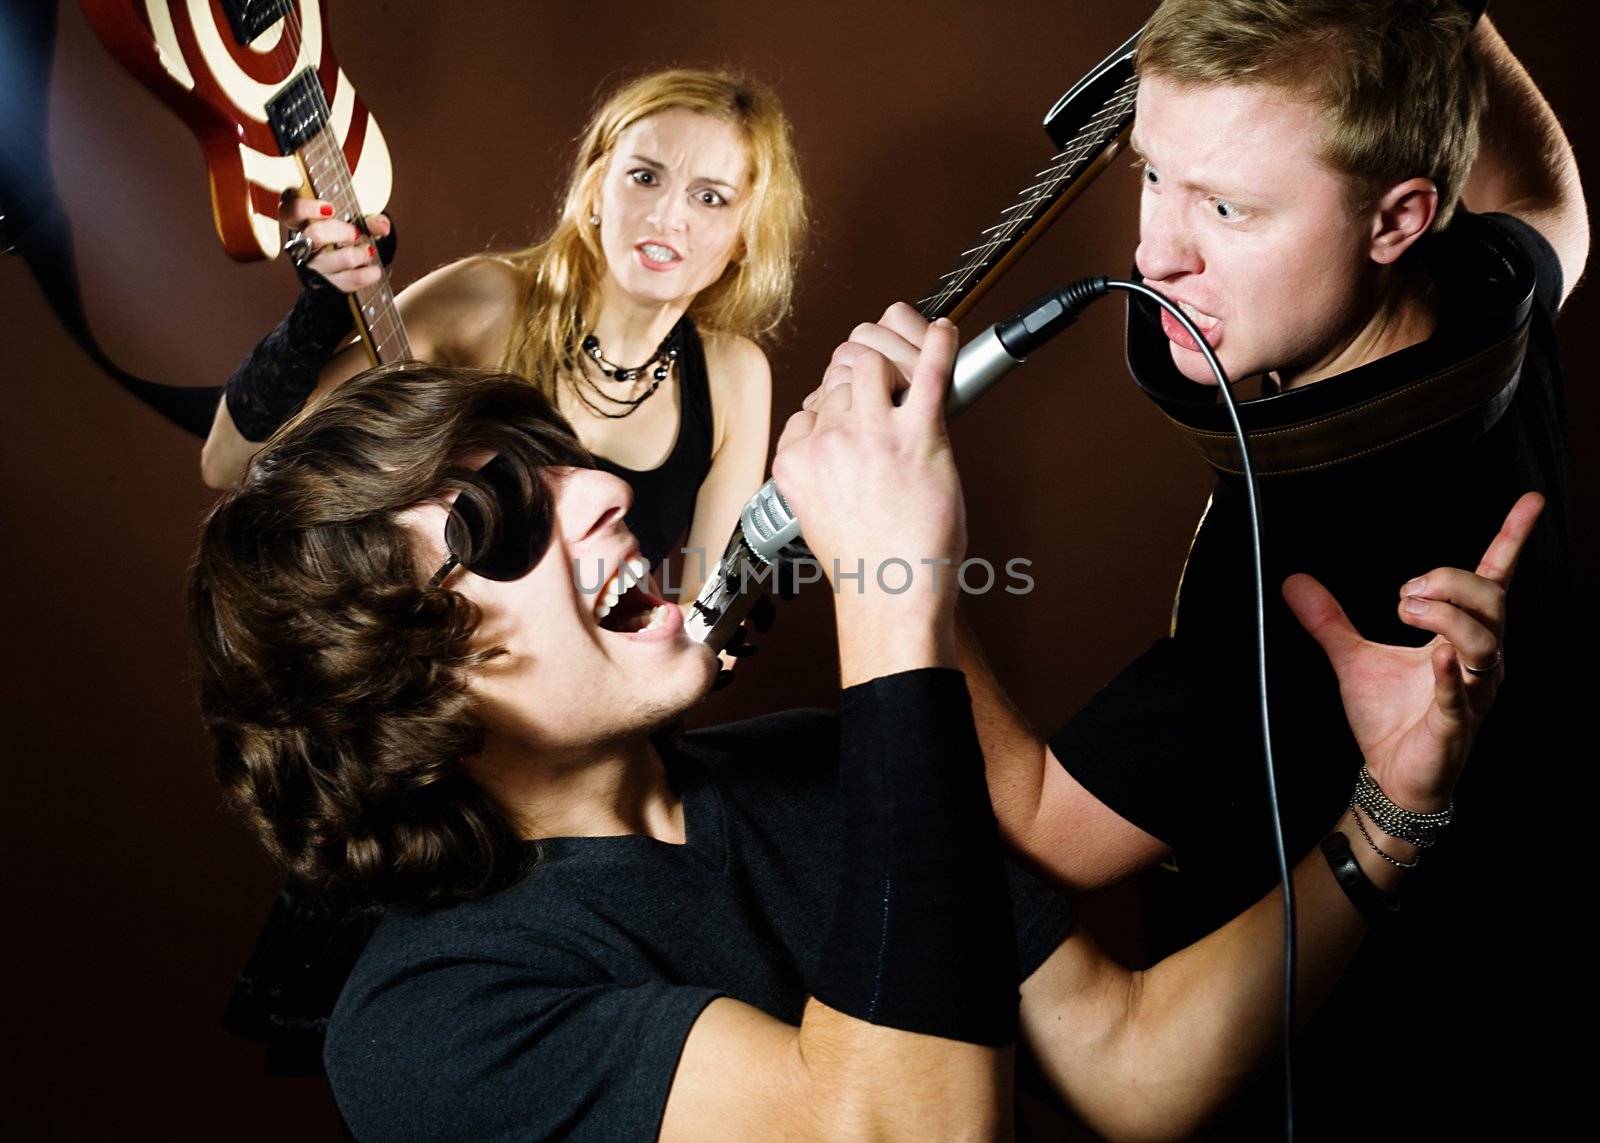 Rock band performance in photostudio